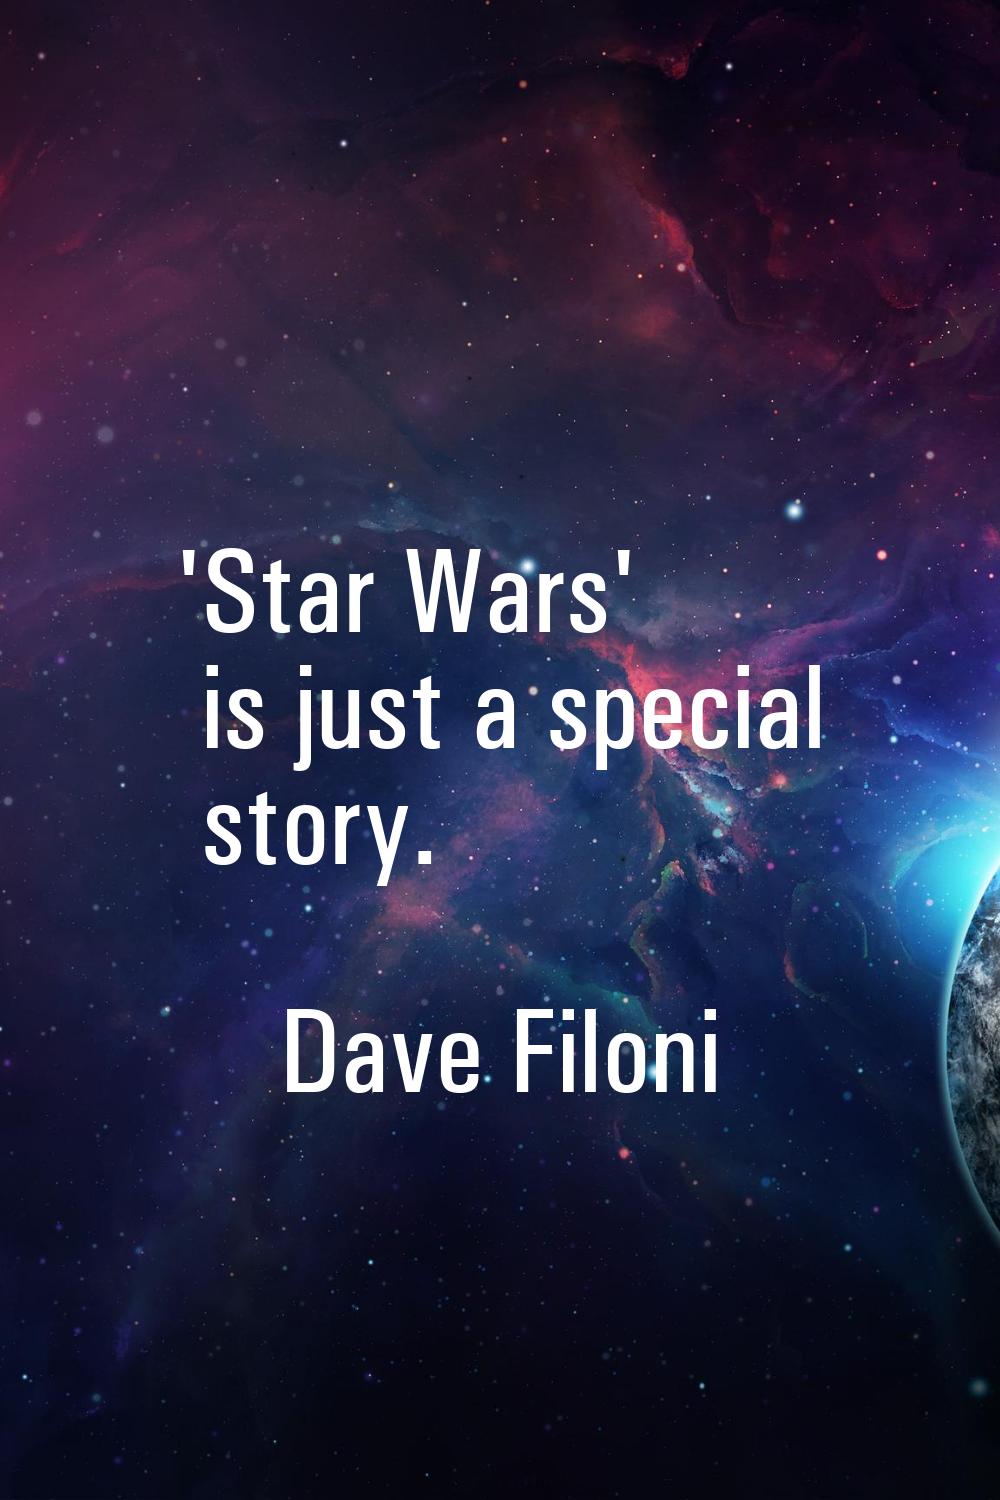 'Star Wars' is just a special story.